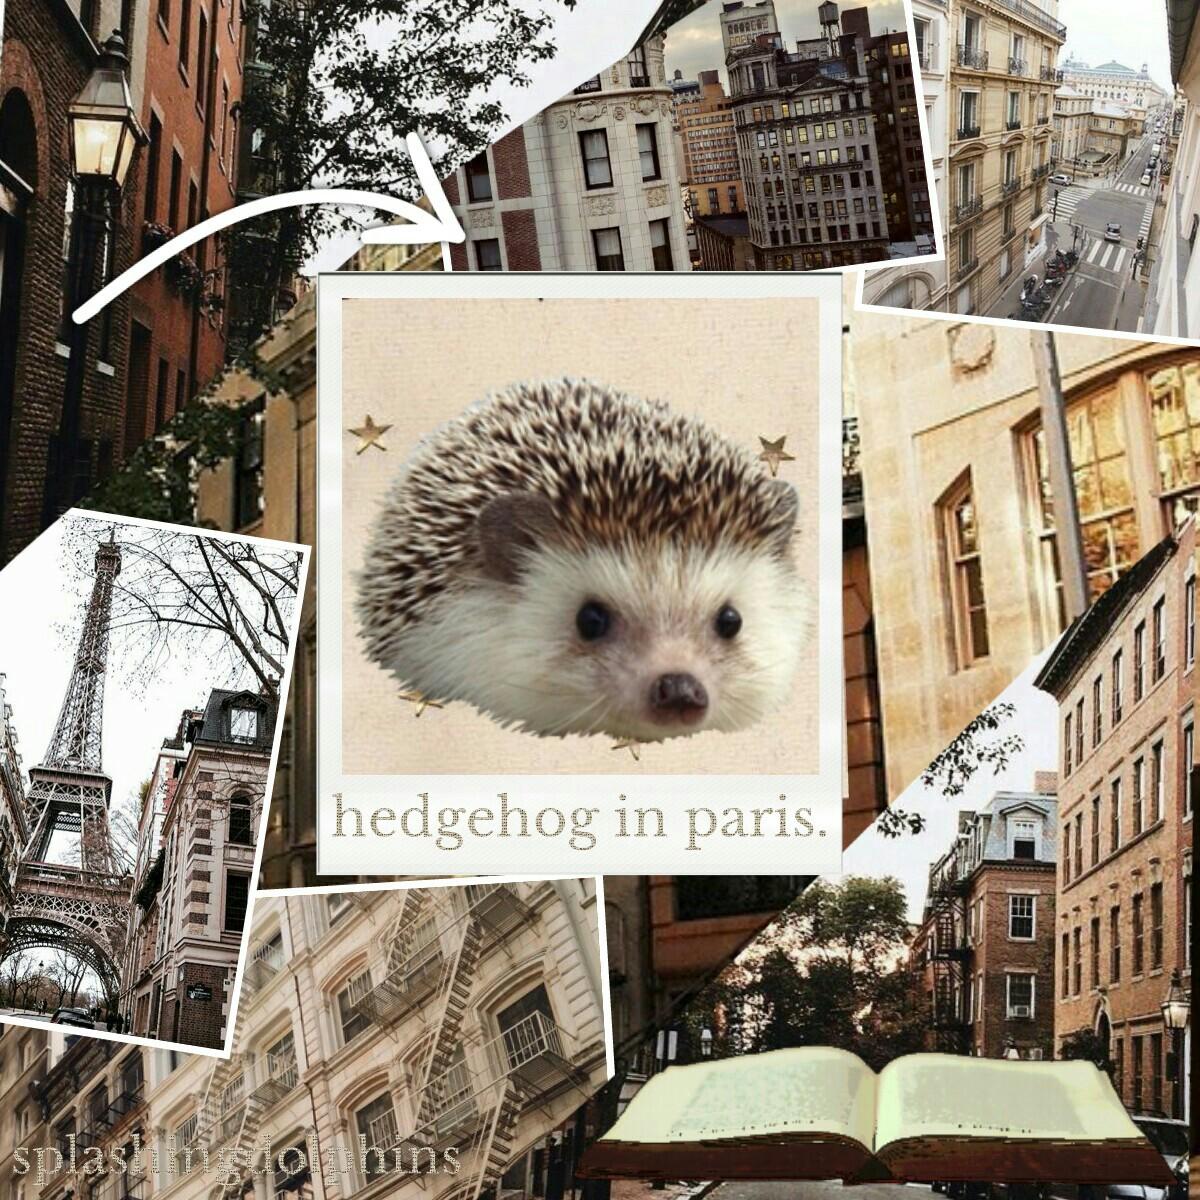 ☕ tap for more ☕

ok so i was going to do a cup of coffee but i decided on a hedgehog because idk i guess i was thinking about hedgehug while making this. welp comment what you think a hedgehog would do in paris lol